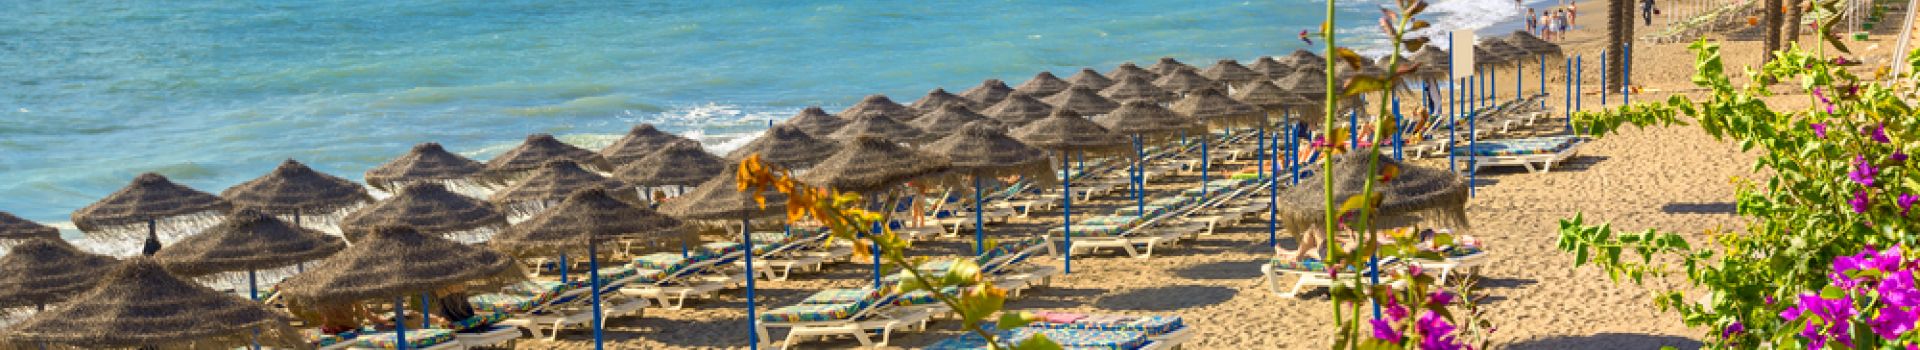 Cheap holidays to Costa del Sol with Cassidy Travel